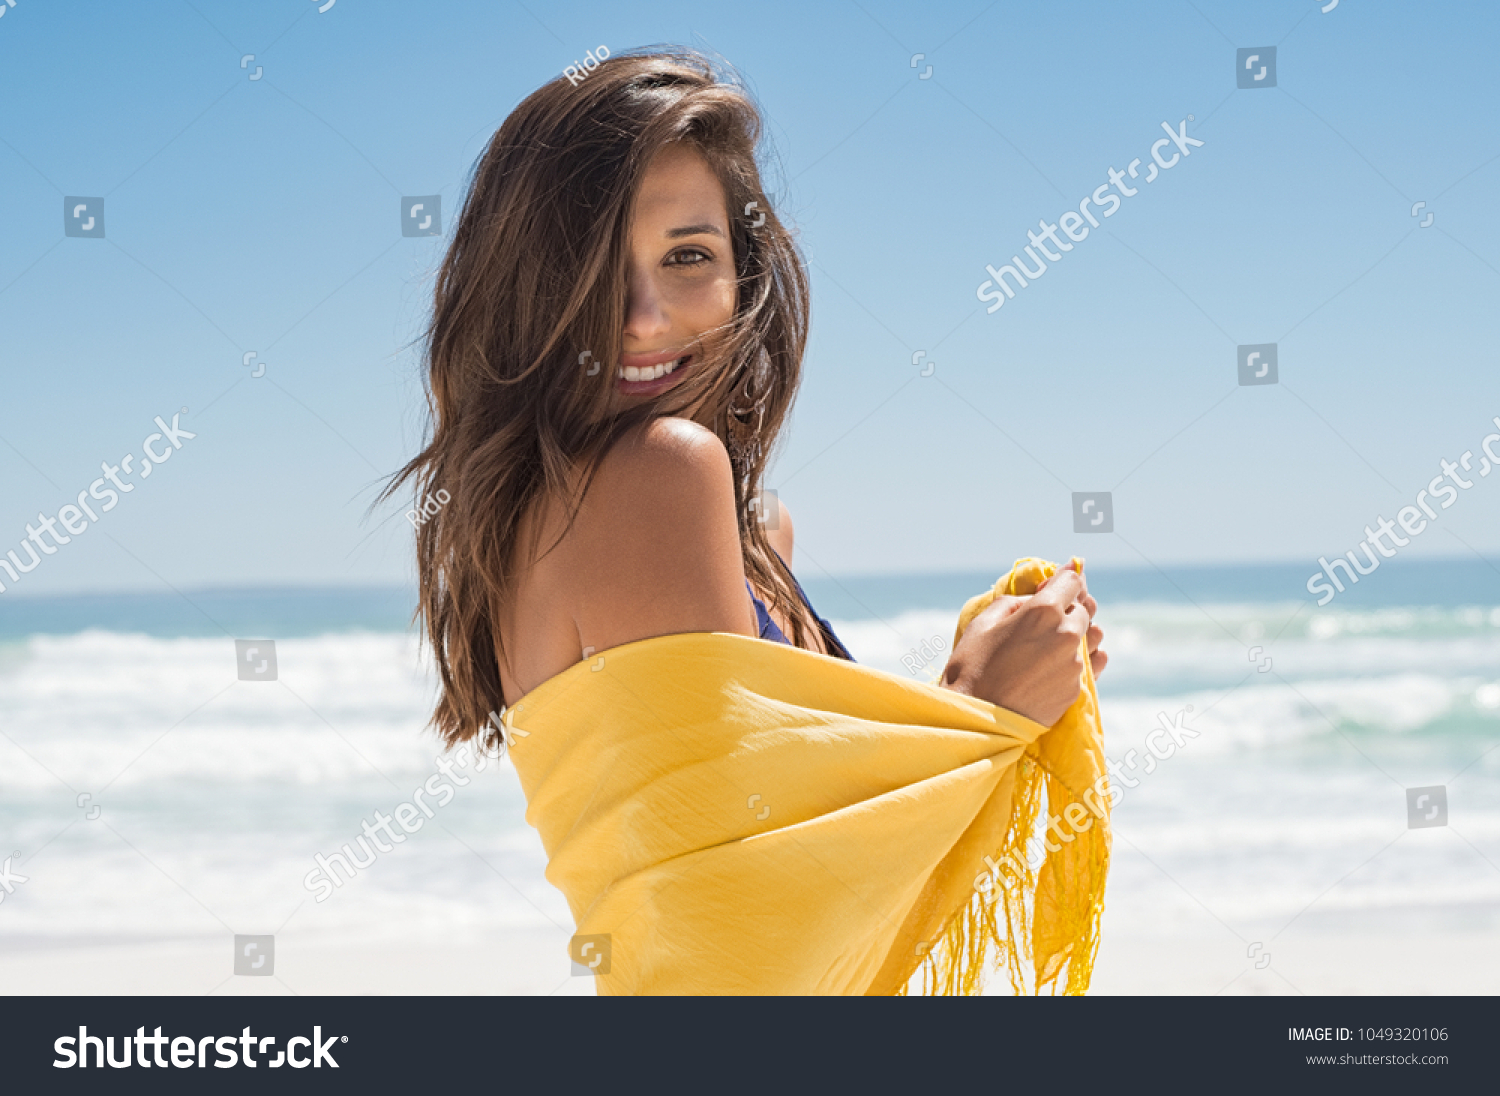 Cheerful young woman in yellow sarong at beach. Happy smiling girl enjoying the beach and looking at camera. Latin tanned woman feeling refreshed in yellow scarf during summer vacation. #1049320106